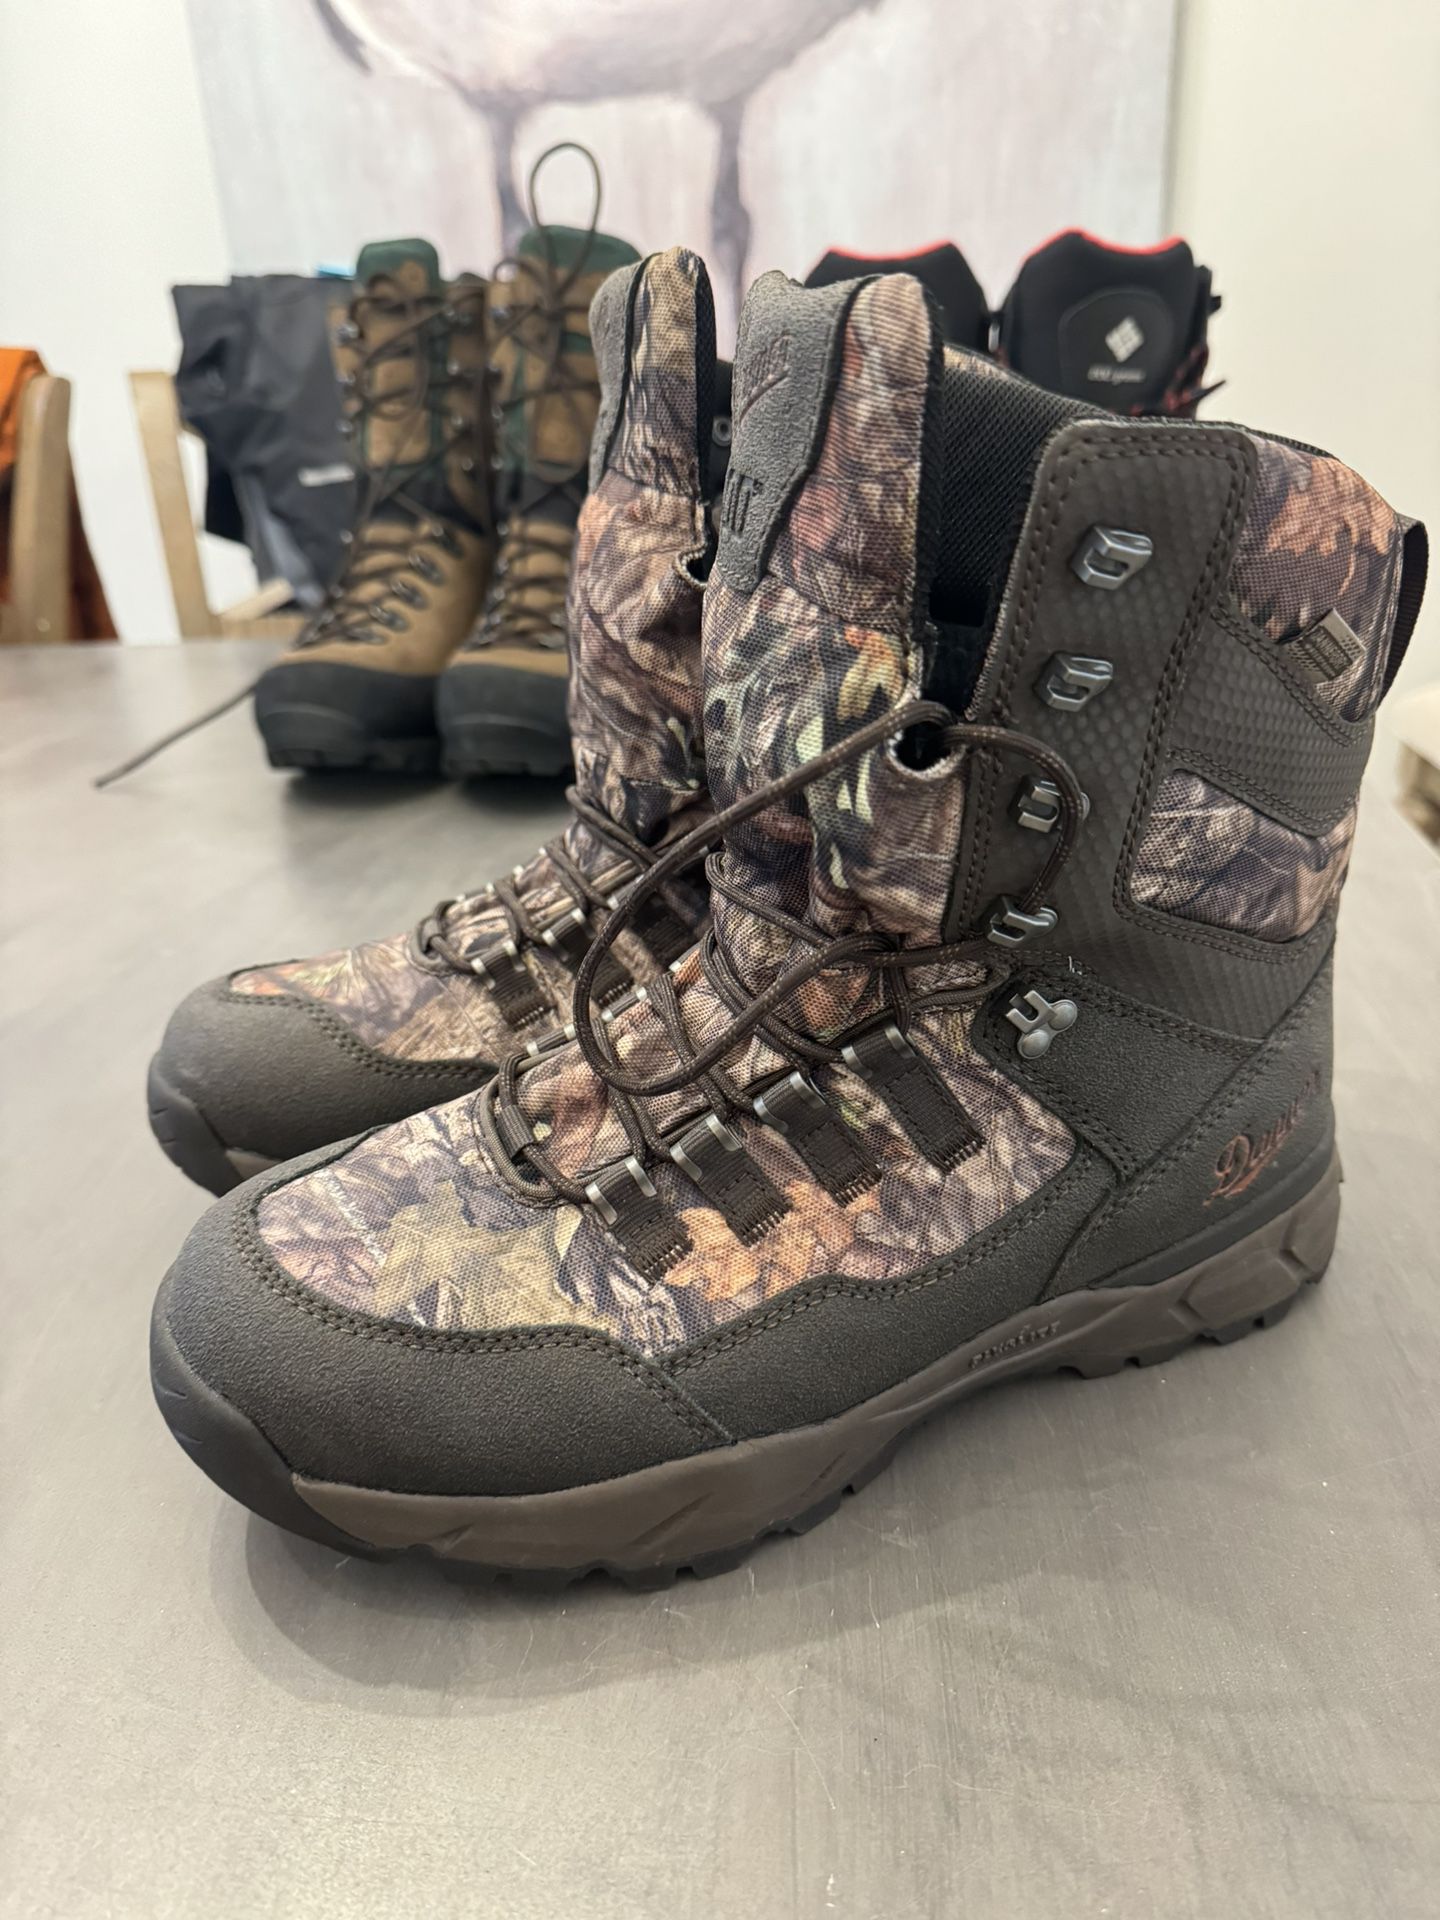 Boots-Danner Vital Mossy Oak Break-Up Country Insulated 400G